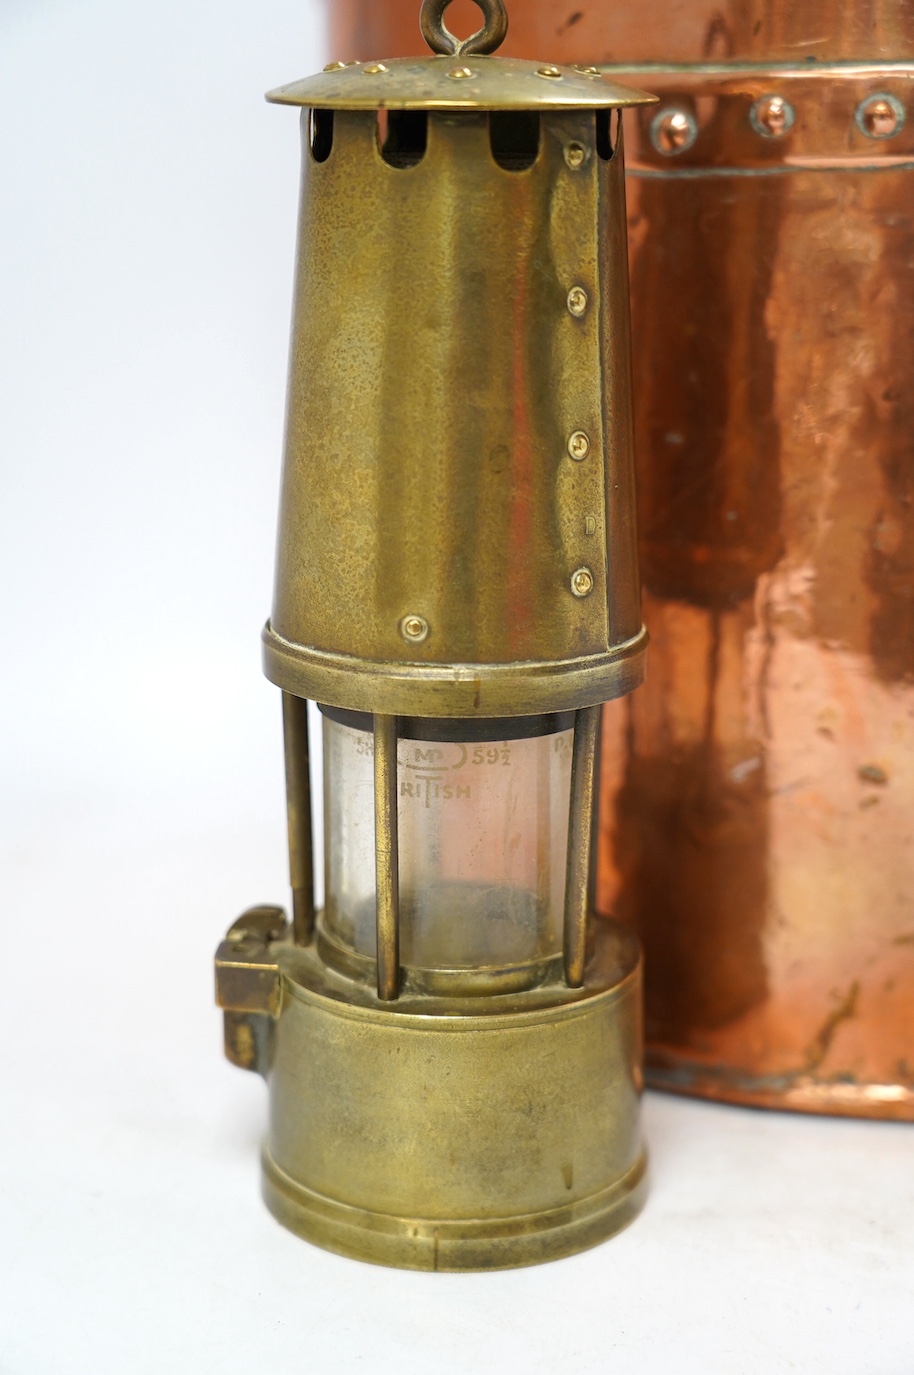 A brass handled copper coal bin and The Protector brass miner’s lamp, coal bin 30cm high. Condition - coal bin has some minor dents, miner’s lamp good